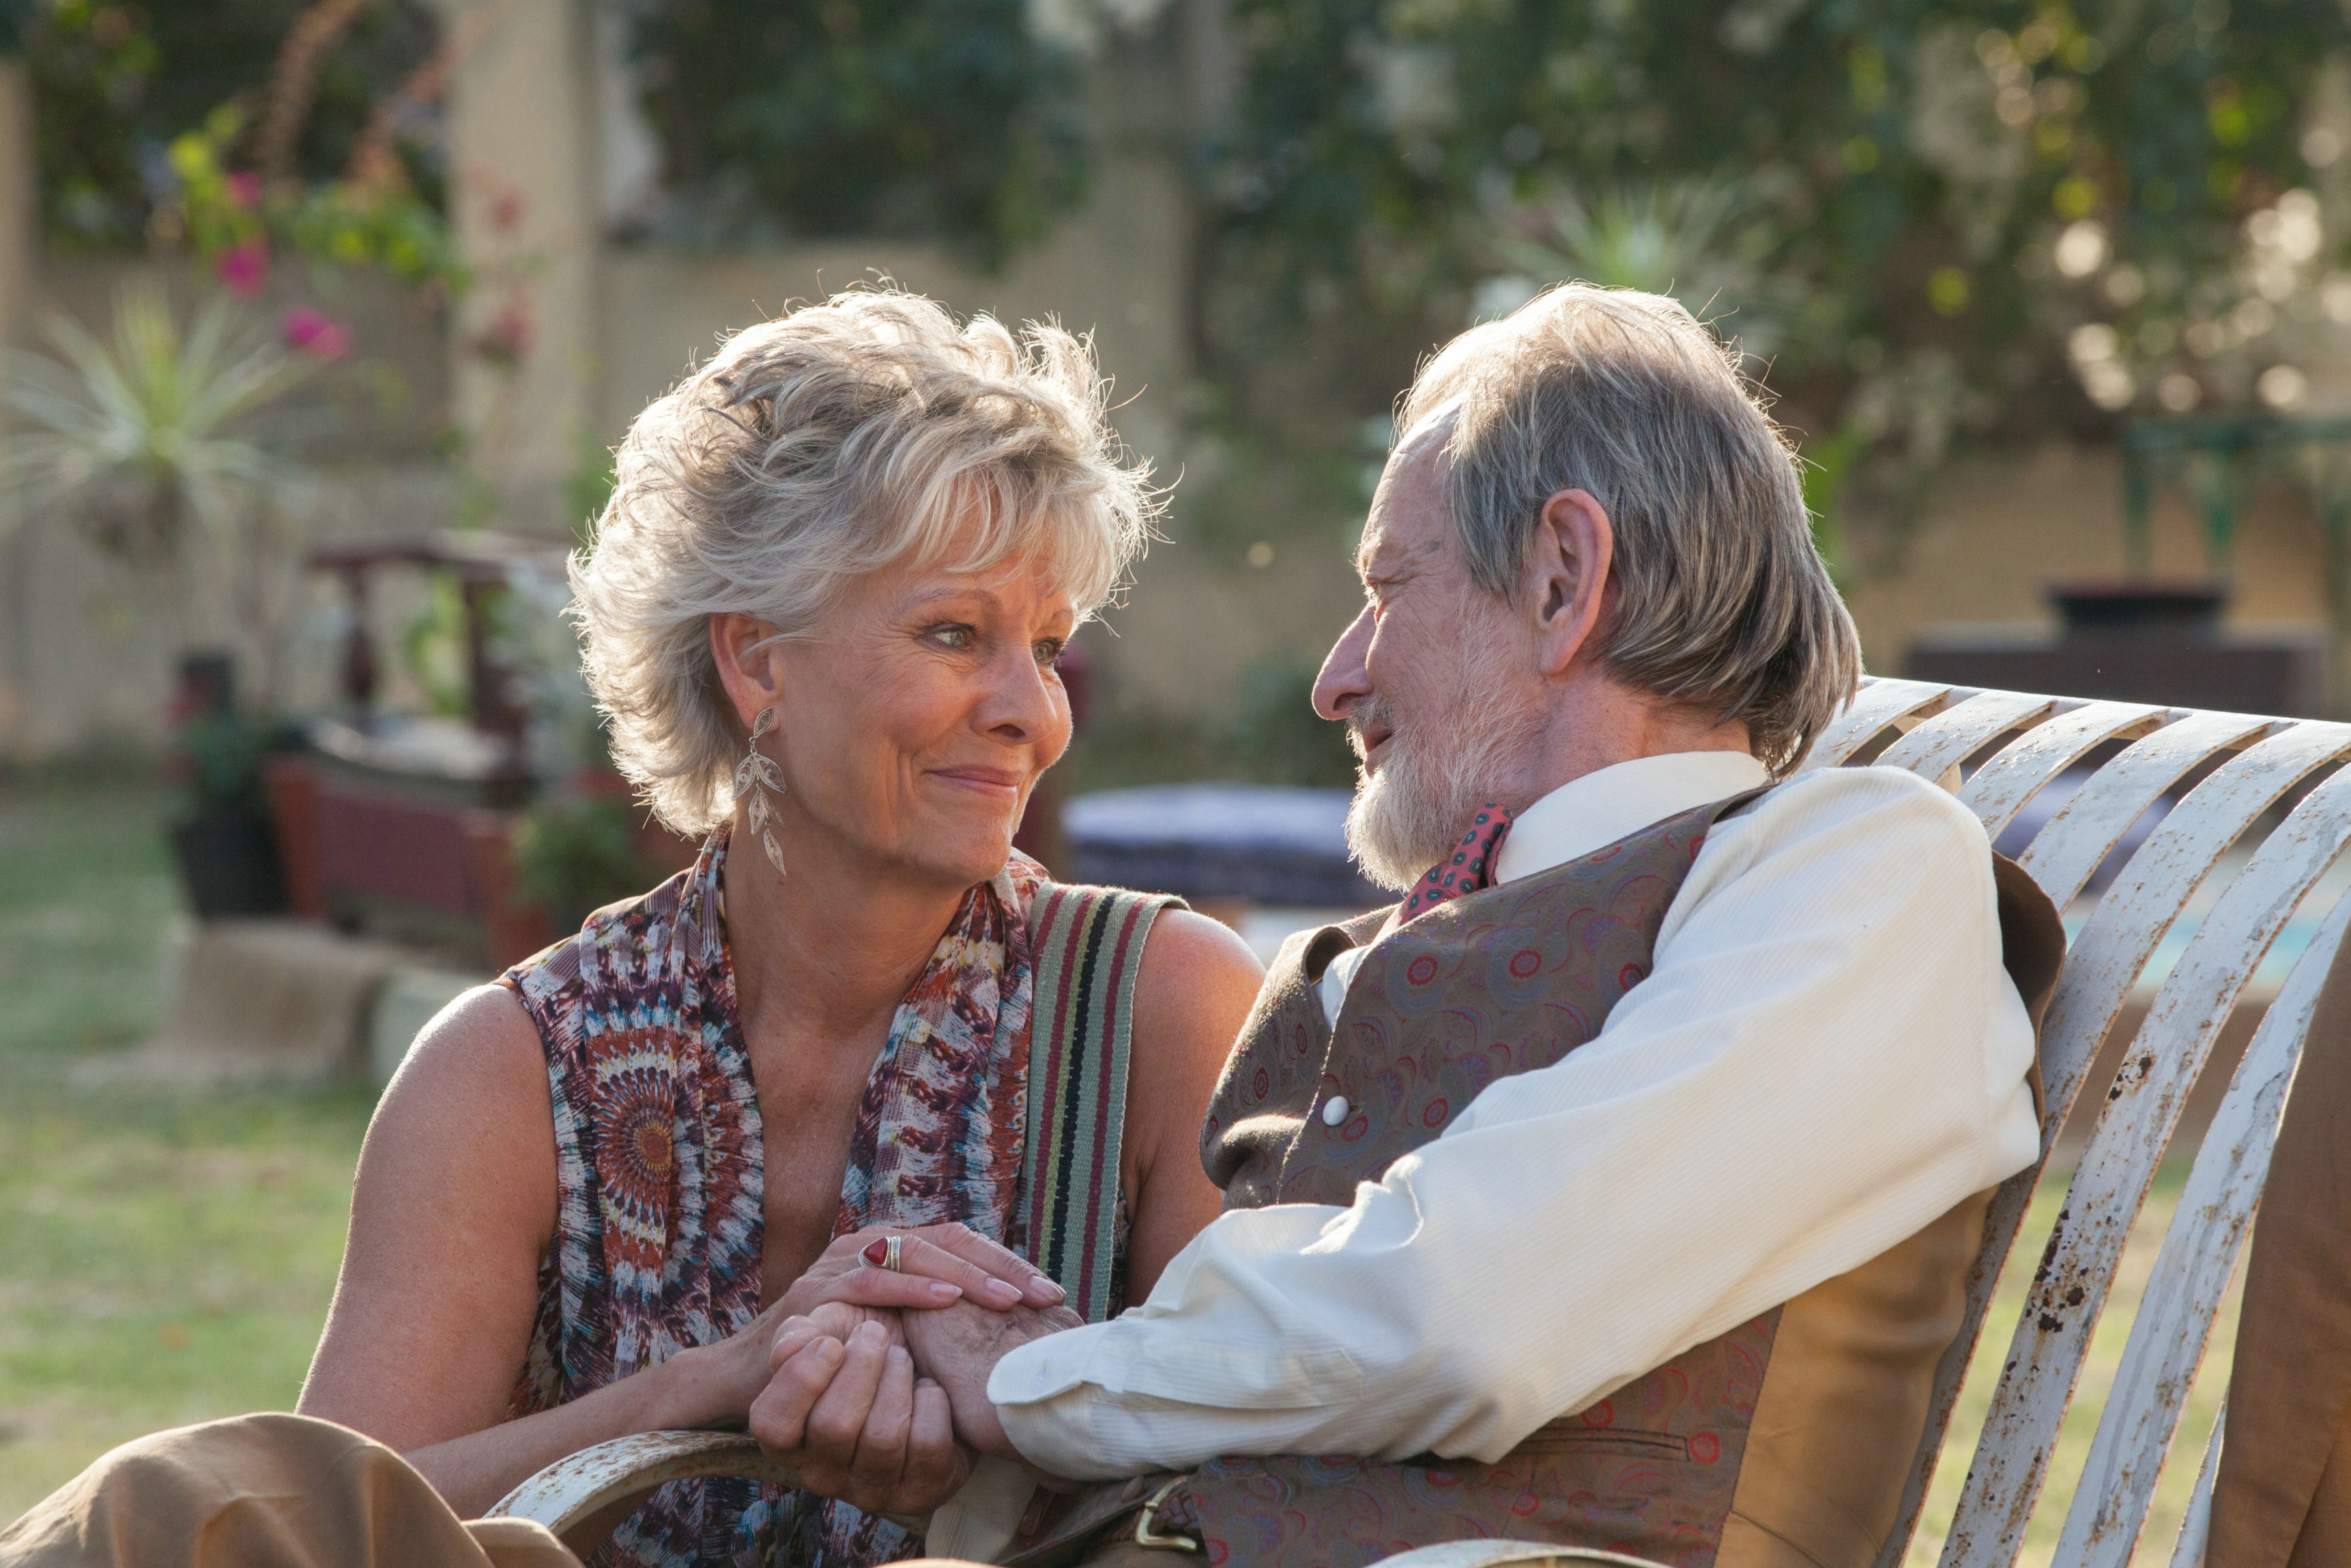 In ‘The Second Best Exotic Marigold Hotel’ with Diana Hardcastle